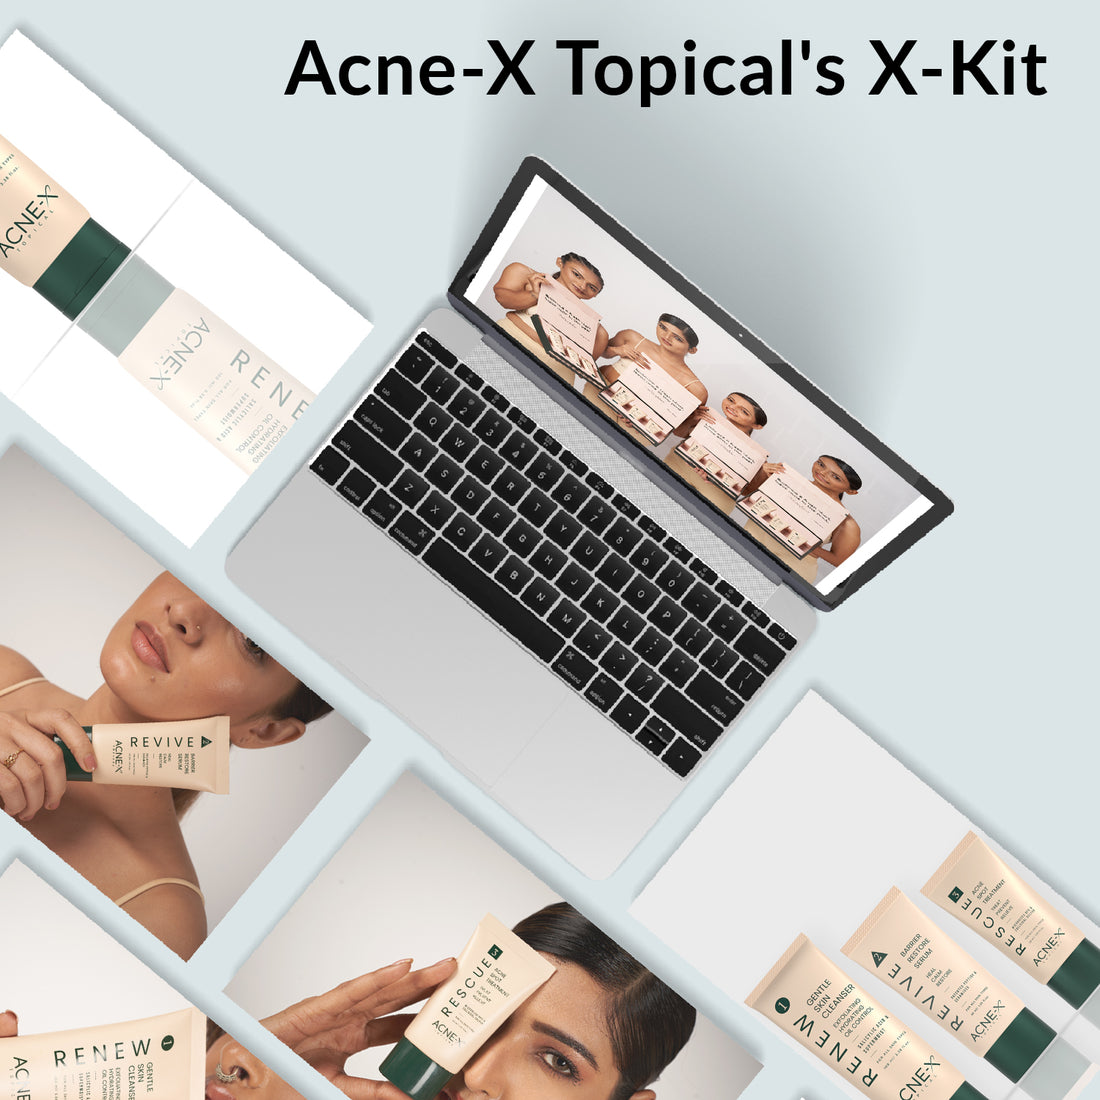 Mastering the Art of Acne-Clearing: Your Guide to Using Acne-X Topical's X-Kit - Acne-X Topical